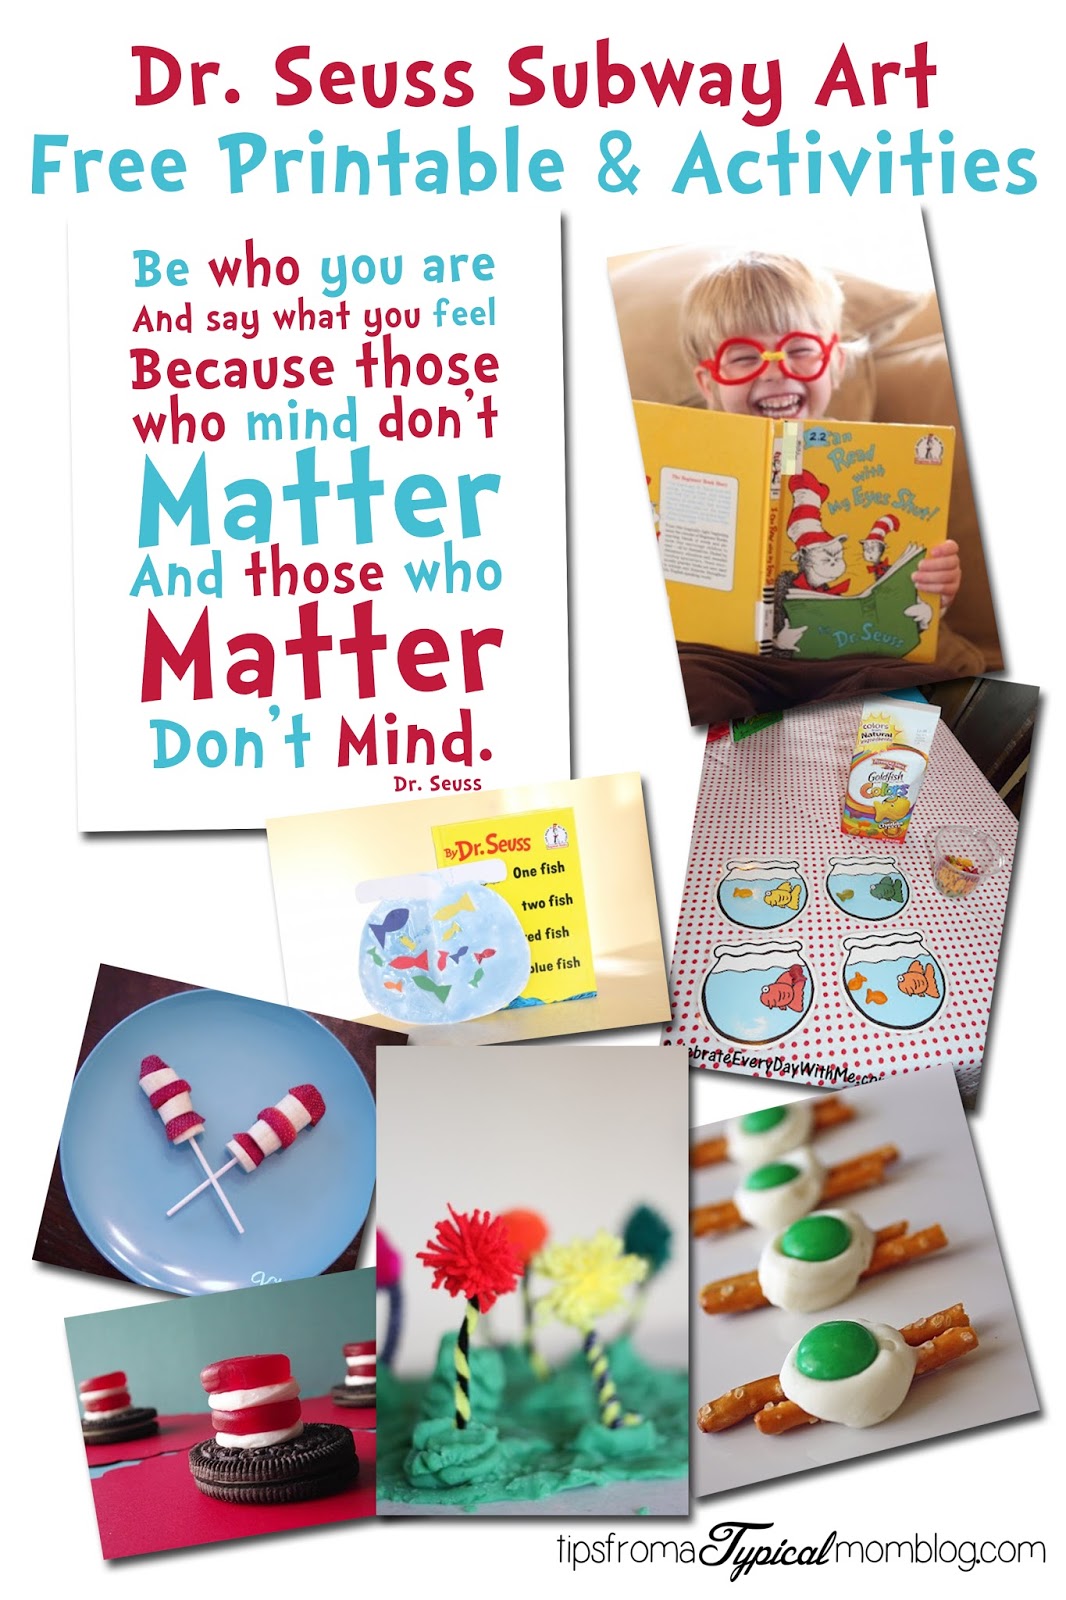 Free Printable Dr. Seuss Quote and a Round Up of fun recipes and activities for Dr. Seuss Birthday on March 2. From Tips From a Typical Mom